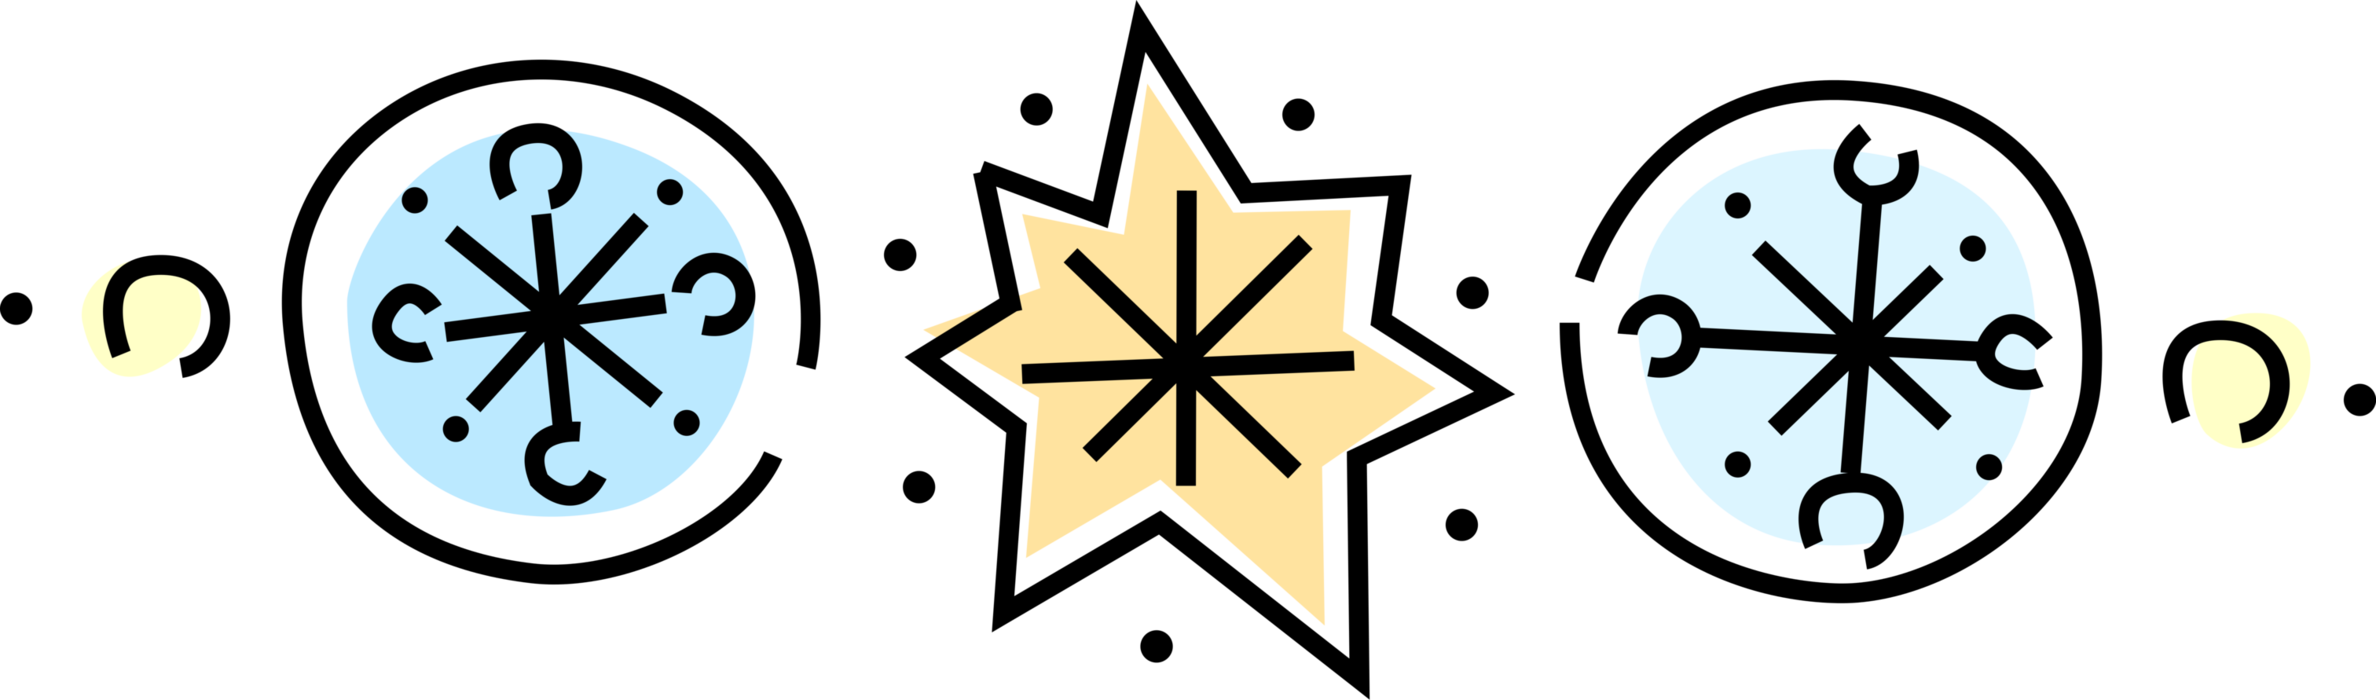 A Yellow Star With Black Lines